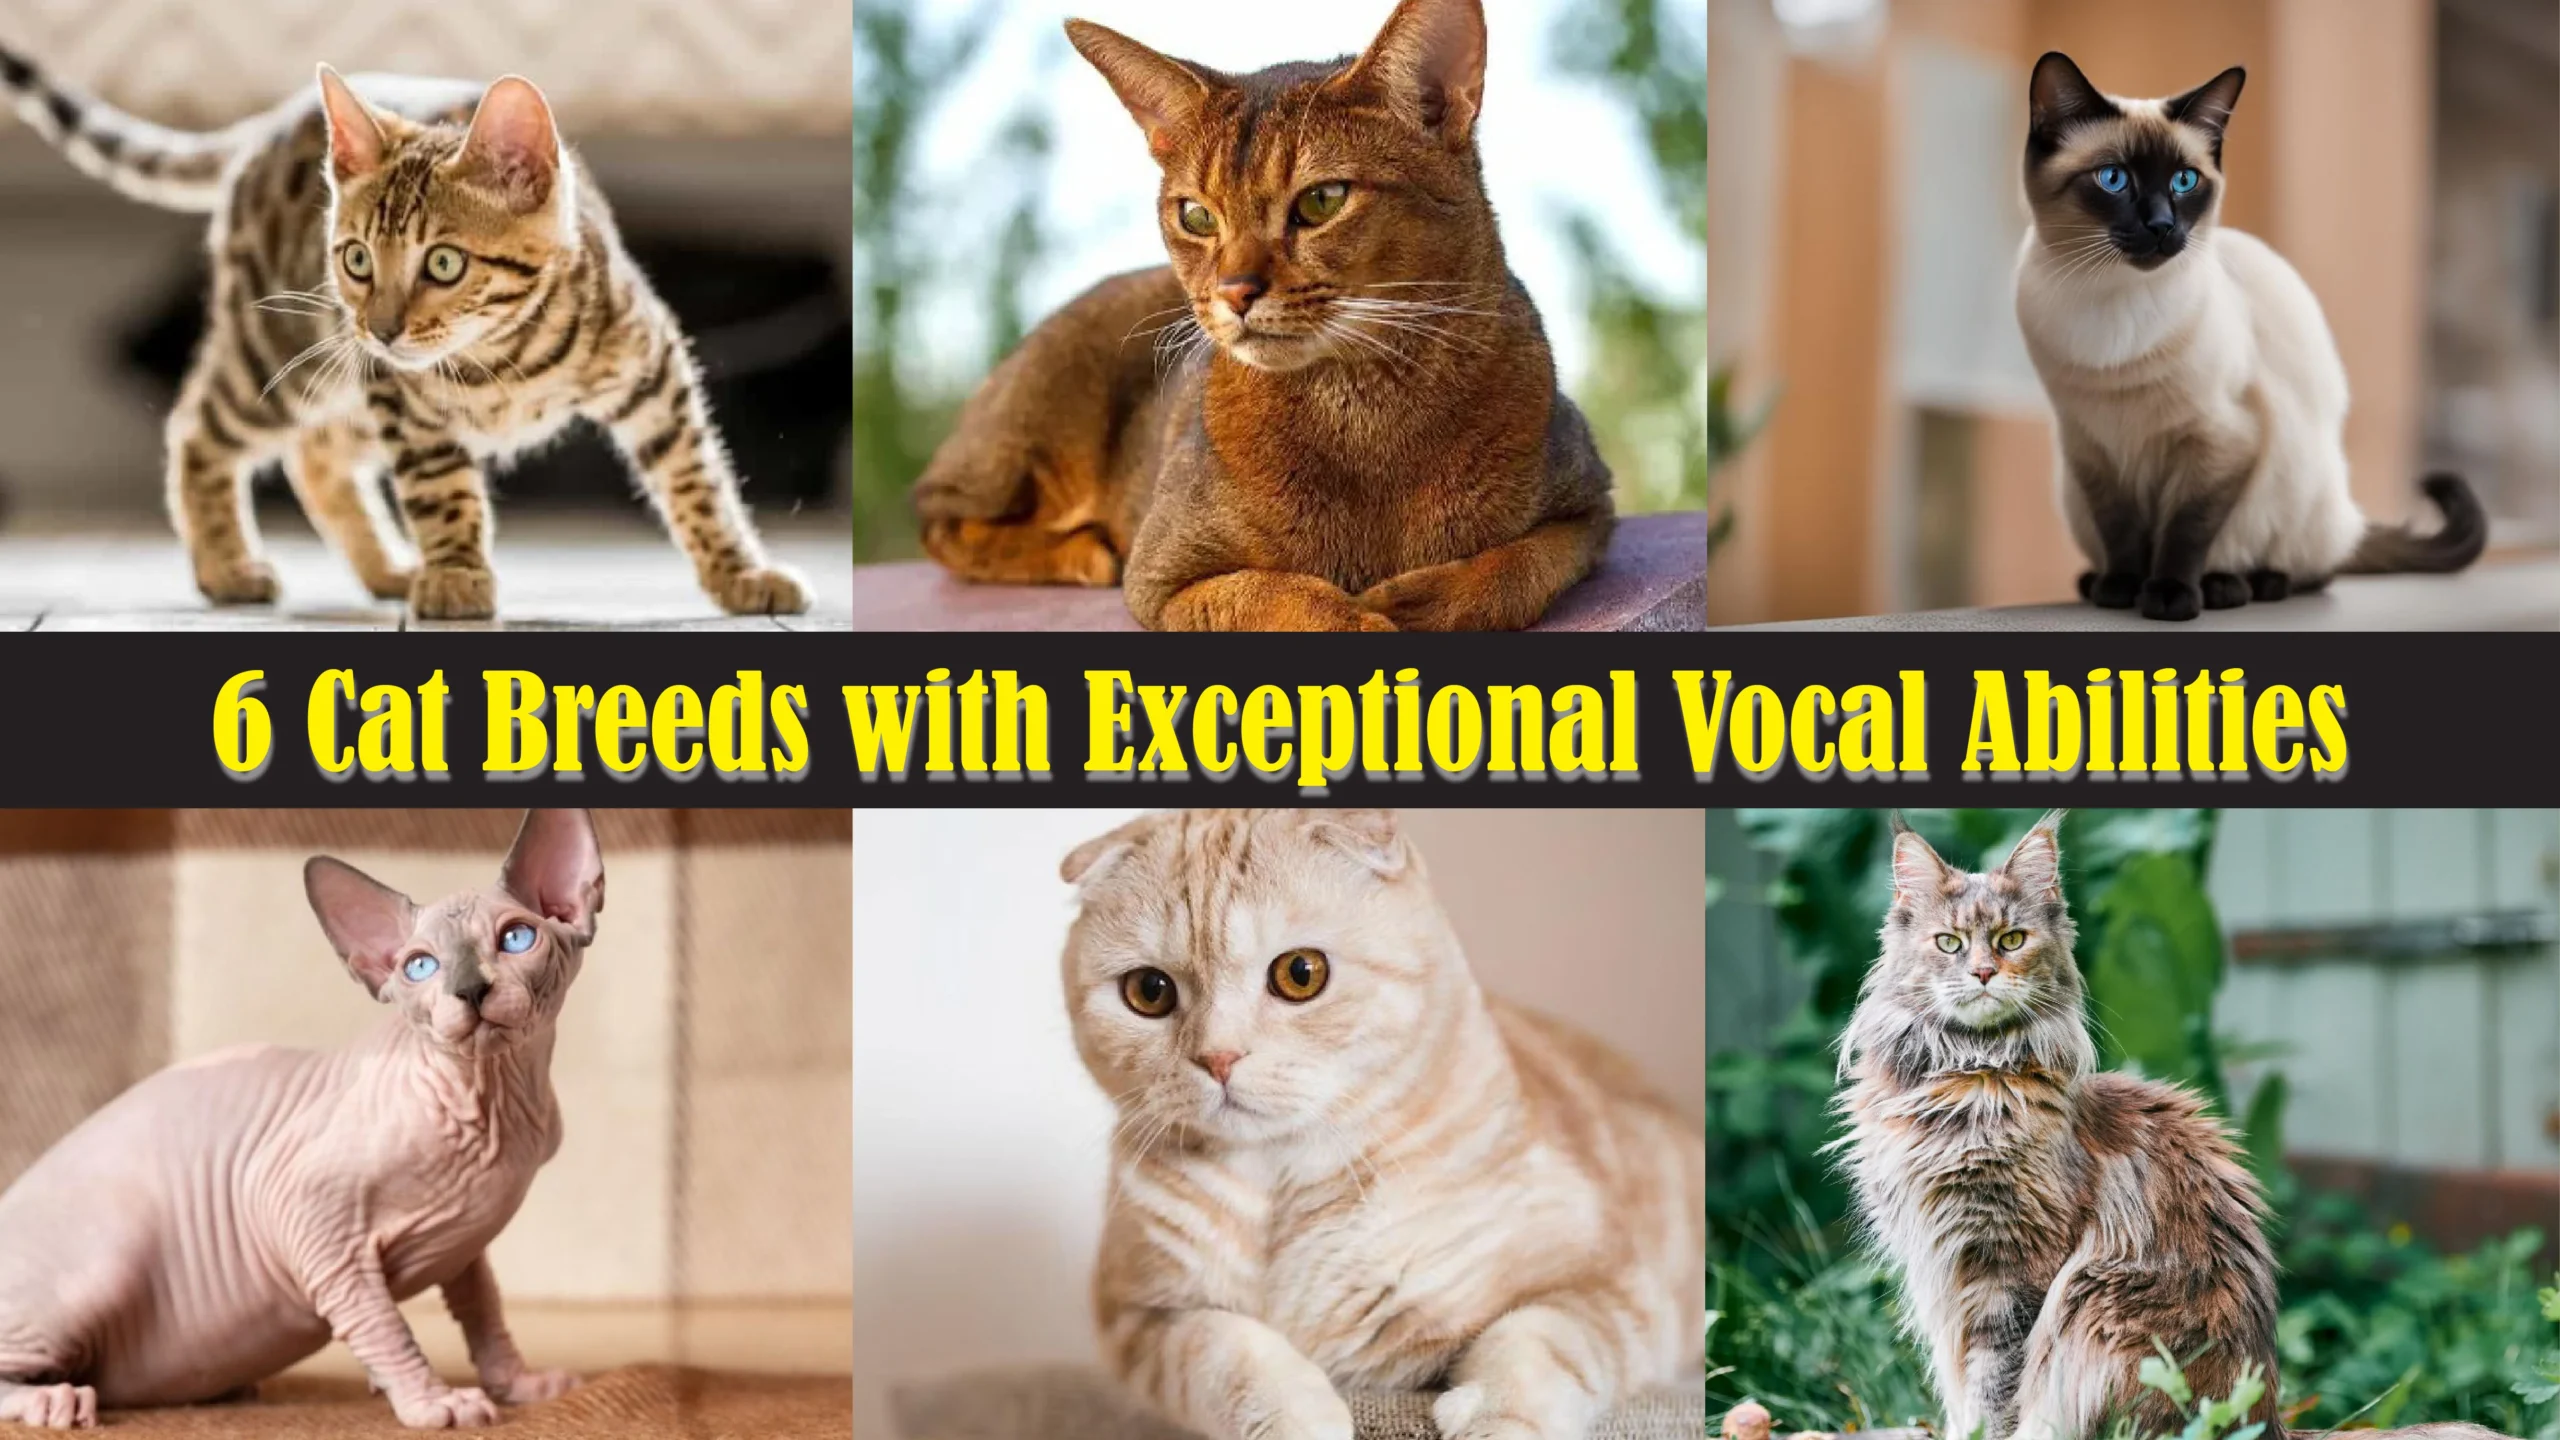 6 Cat Breeds with Exceptional Vocal Abilities